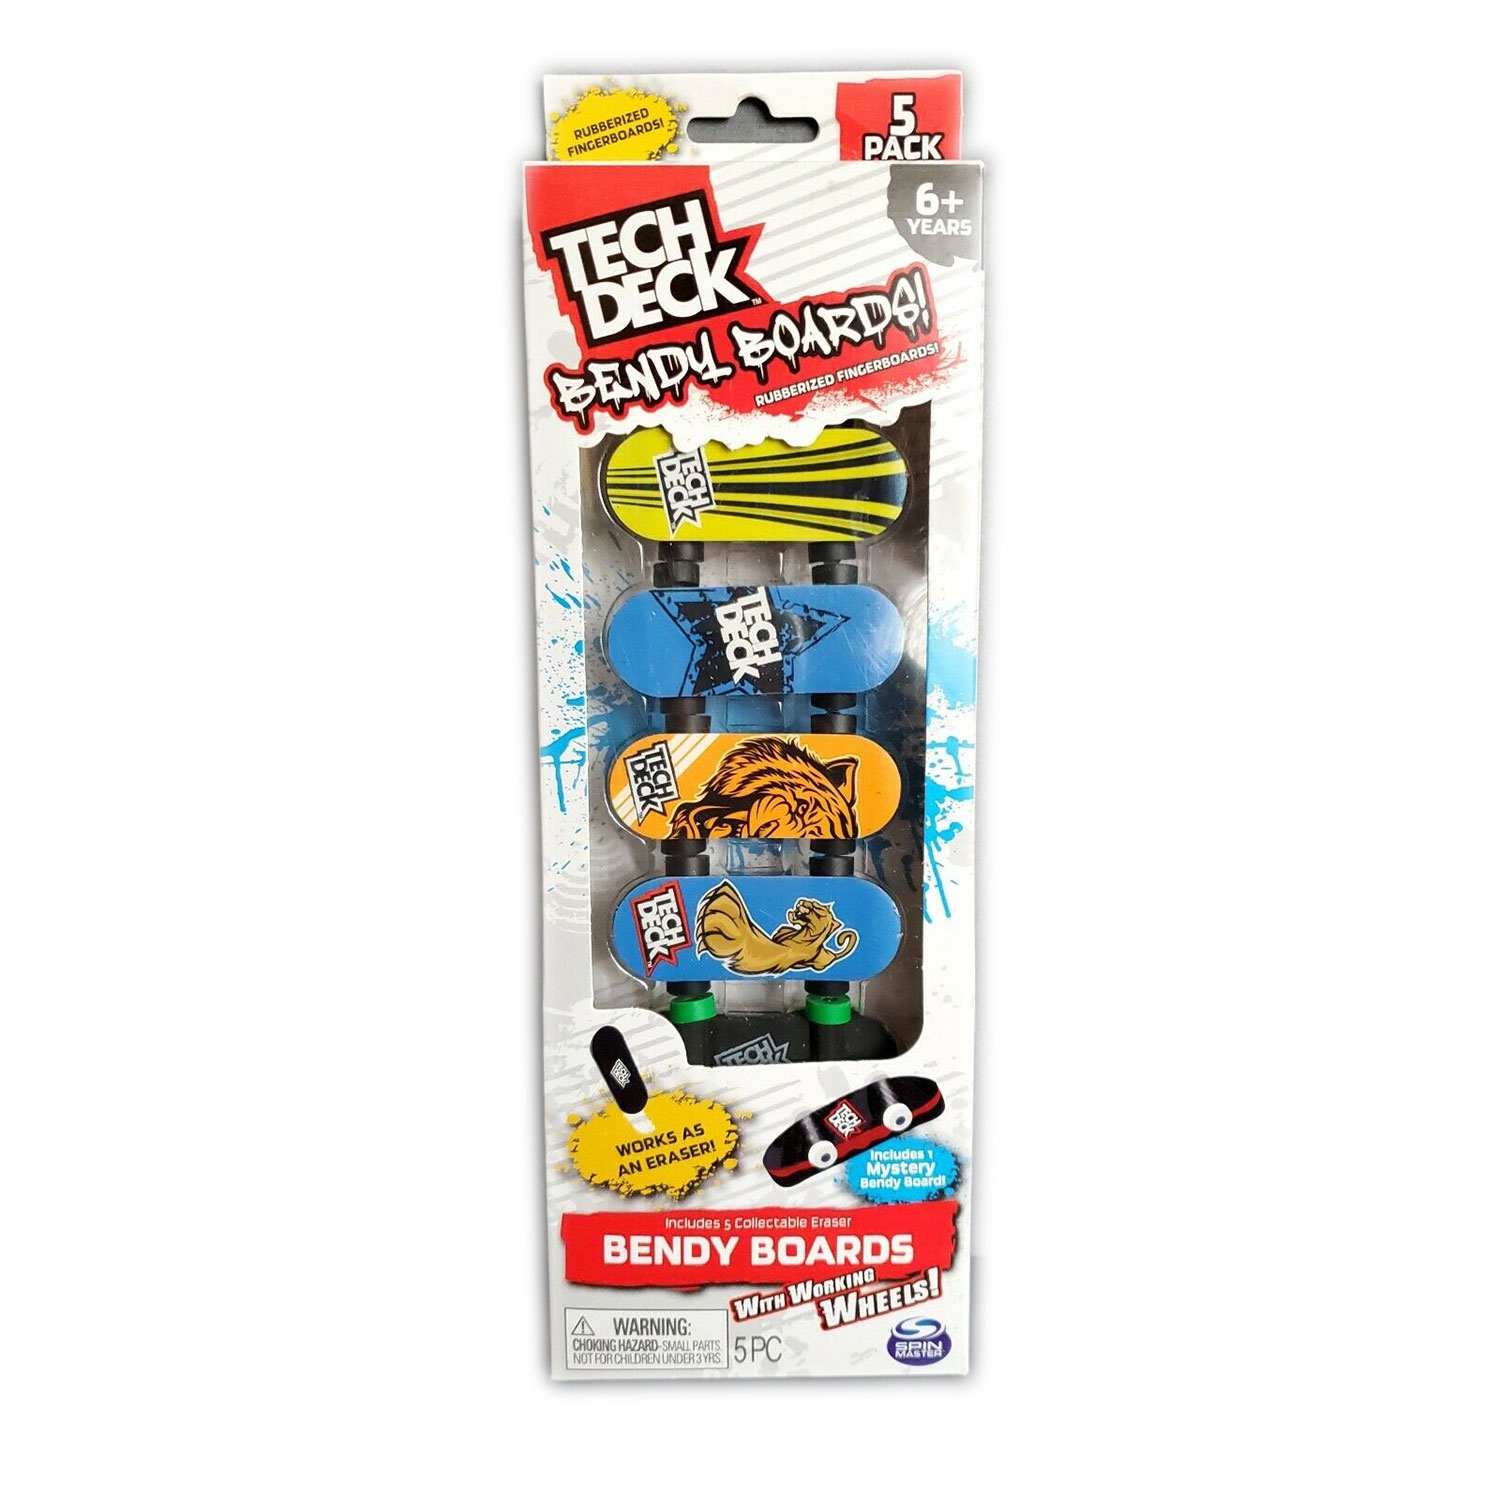 Tech Deck Bendy Boards Collectable Eraser 5pcs Assorted.